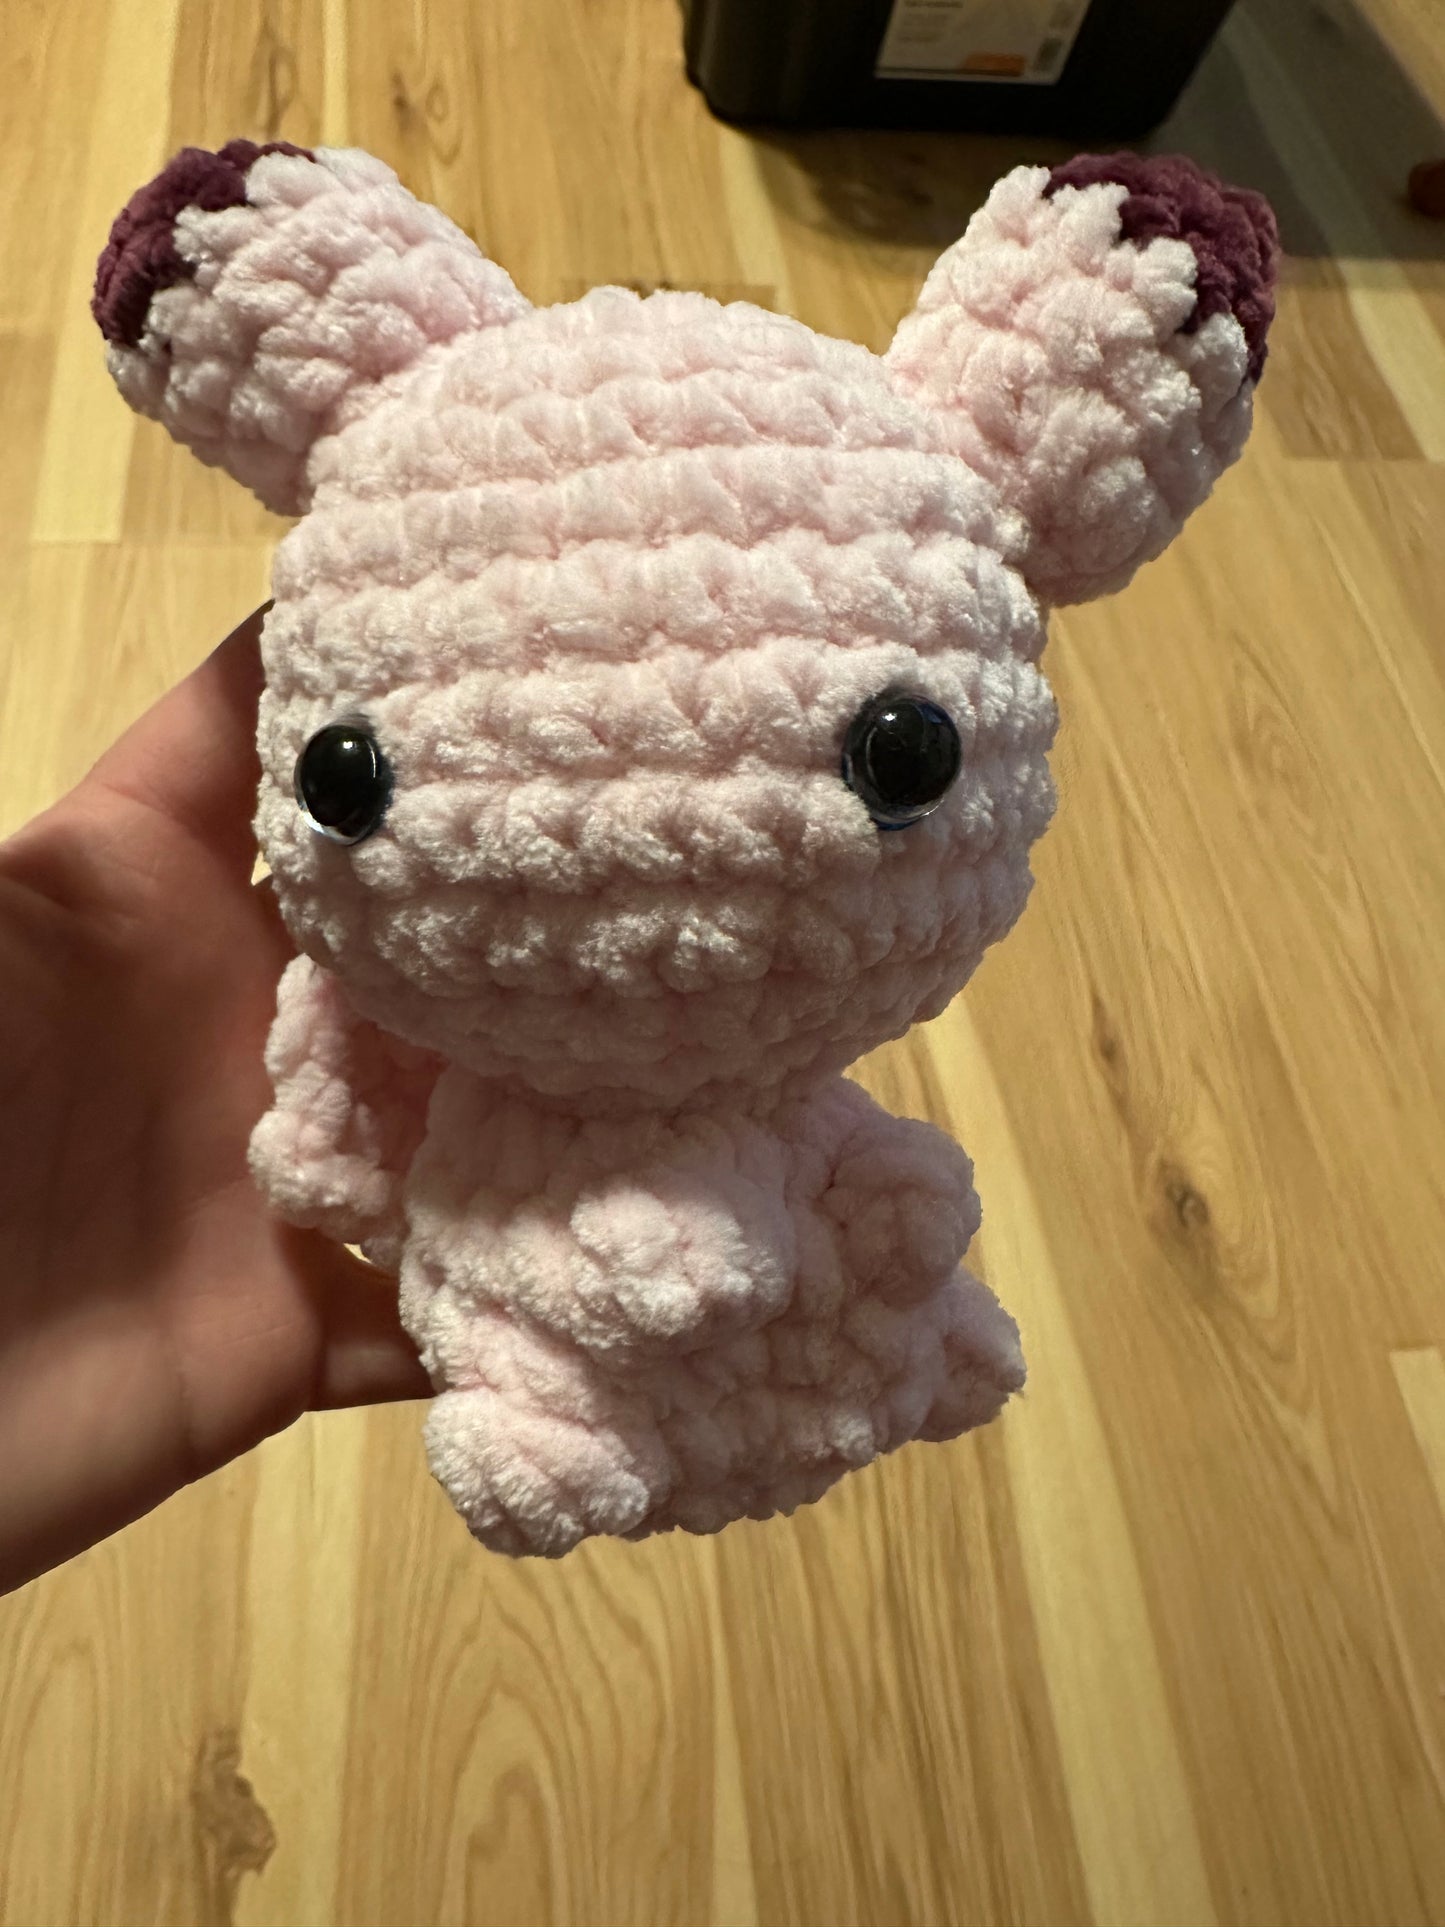 Pika crochet finished product